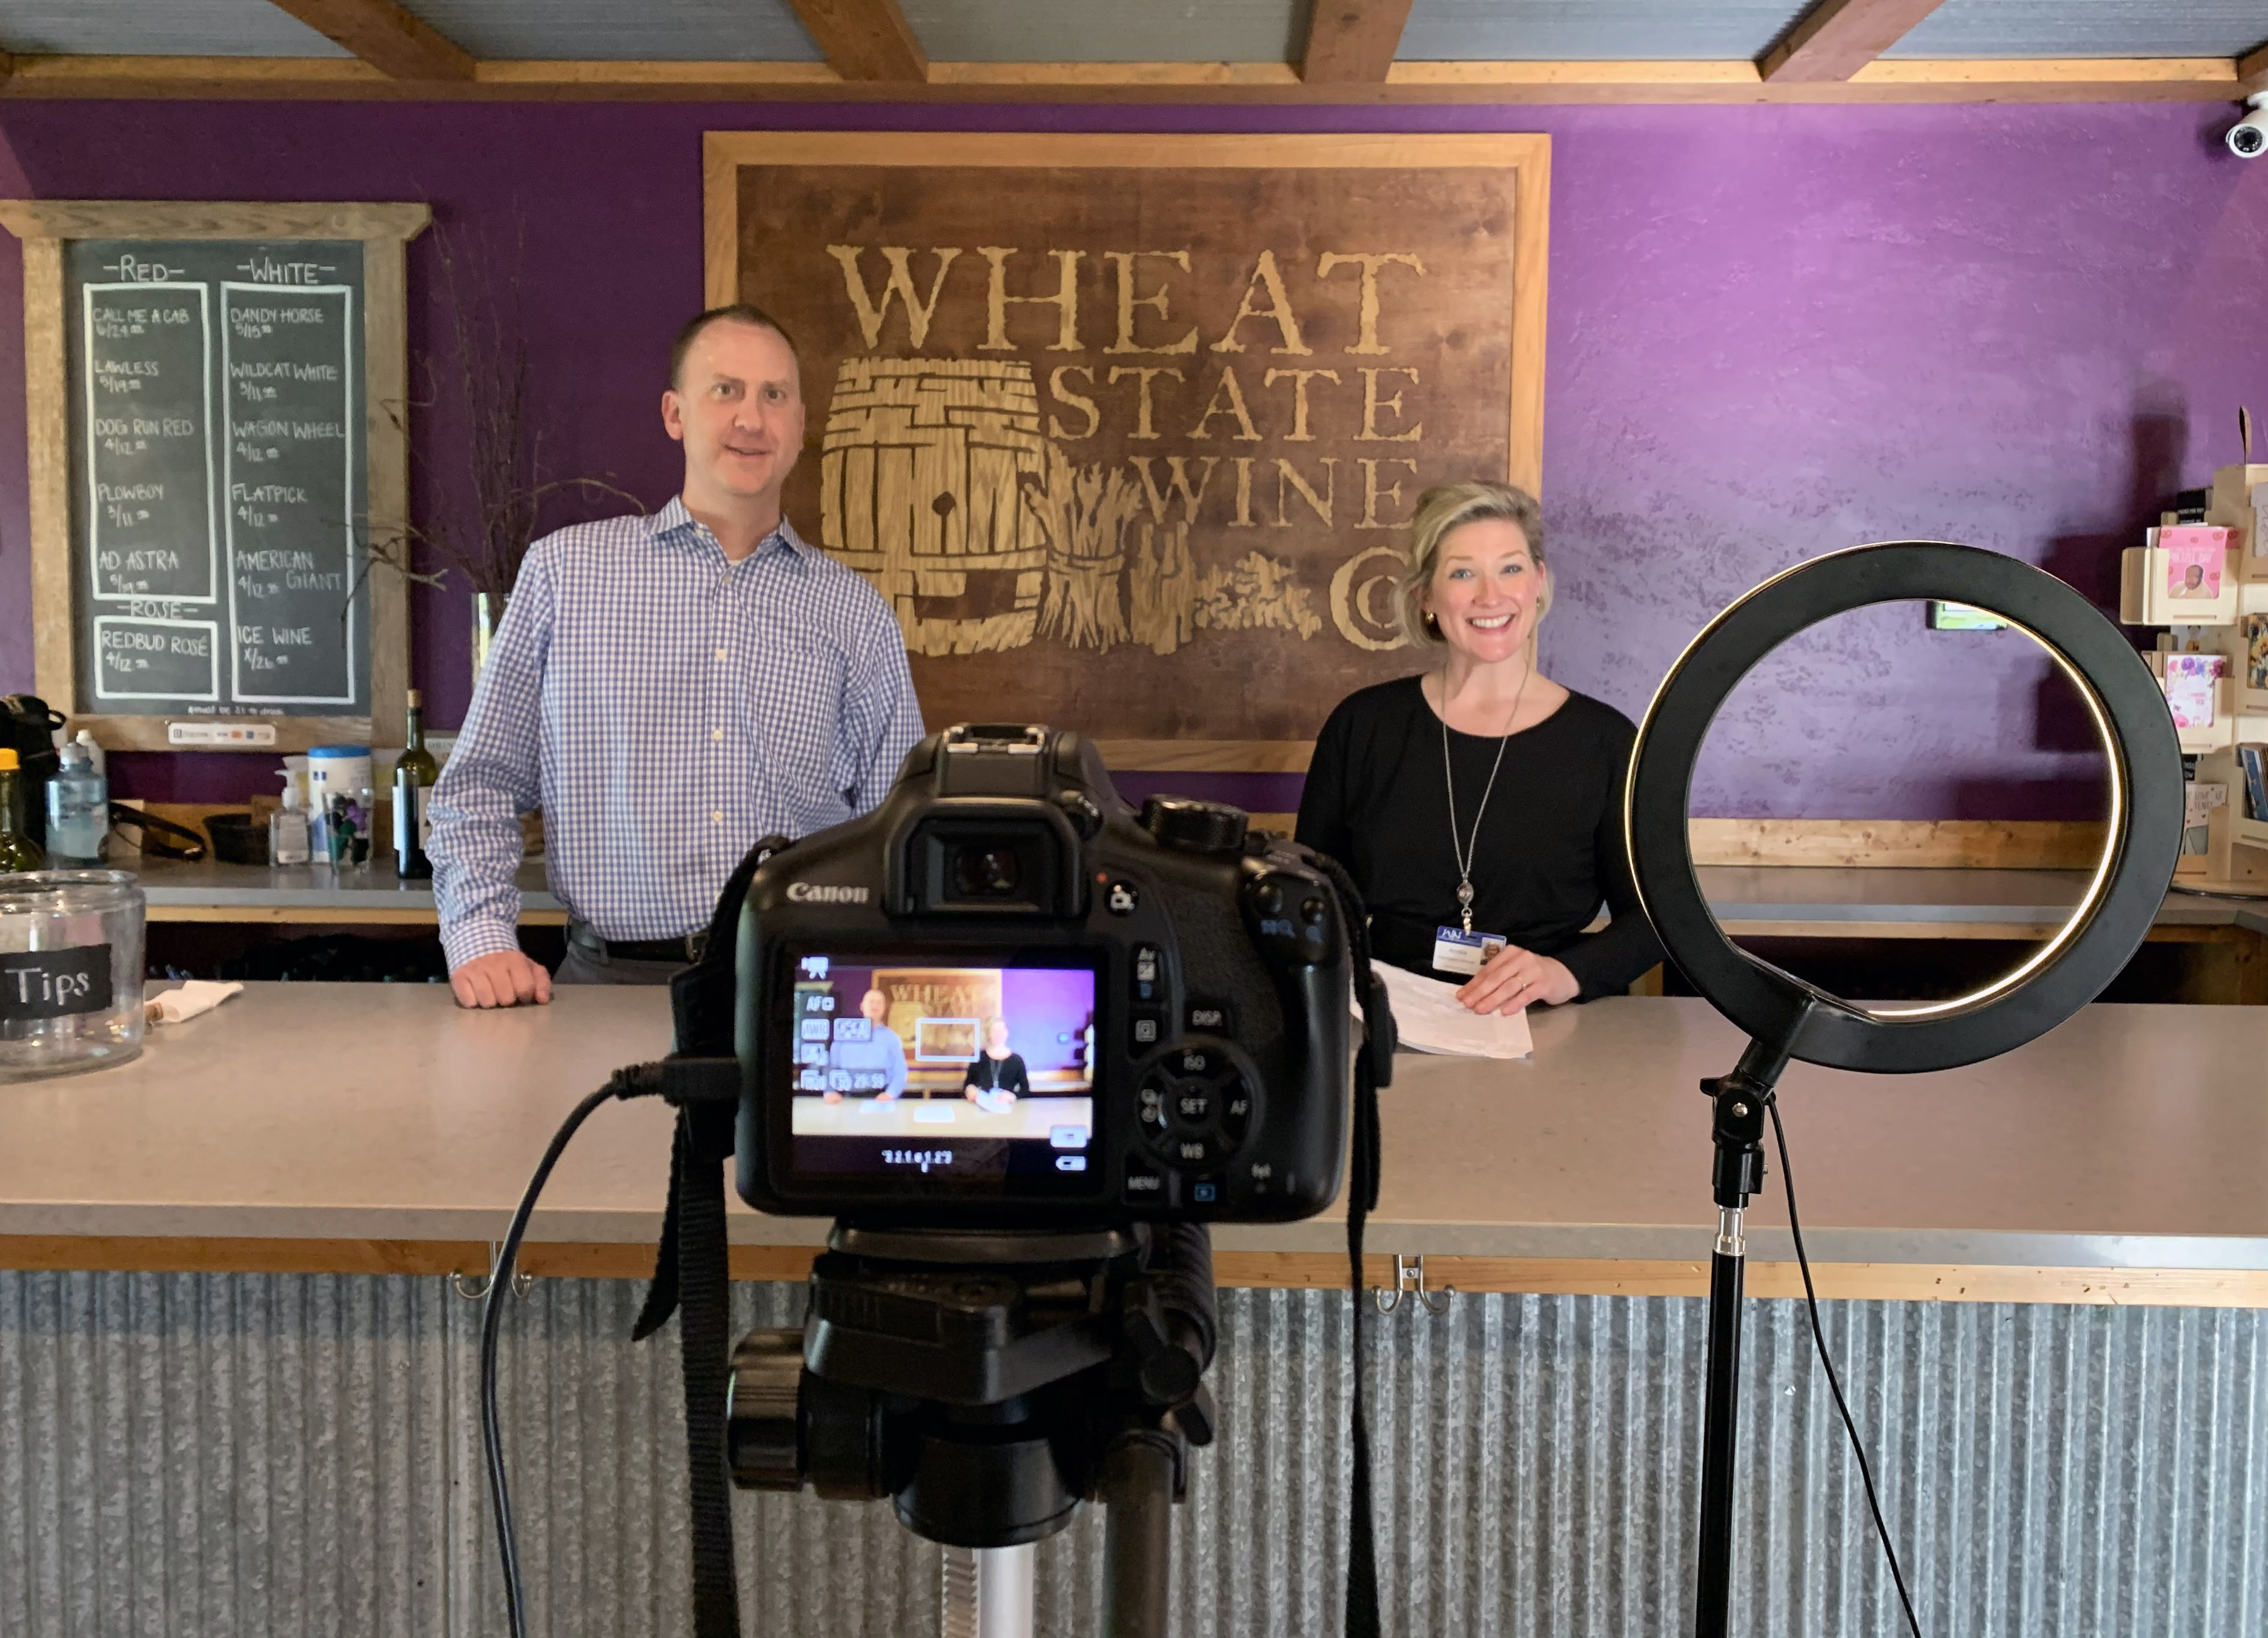 Behind the counter at Wheat State Wine Co., Union State Bank Winfield Market President Cory Helmer and William Newton Healthcare Foundation Director Annika Morris pre-record elements of the upcoming virtual gala benefiting William Newton Hospital.